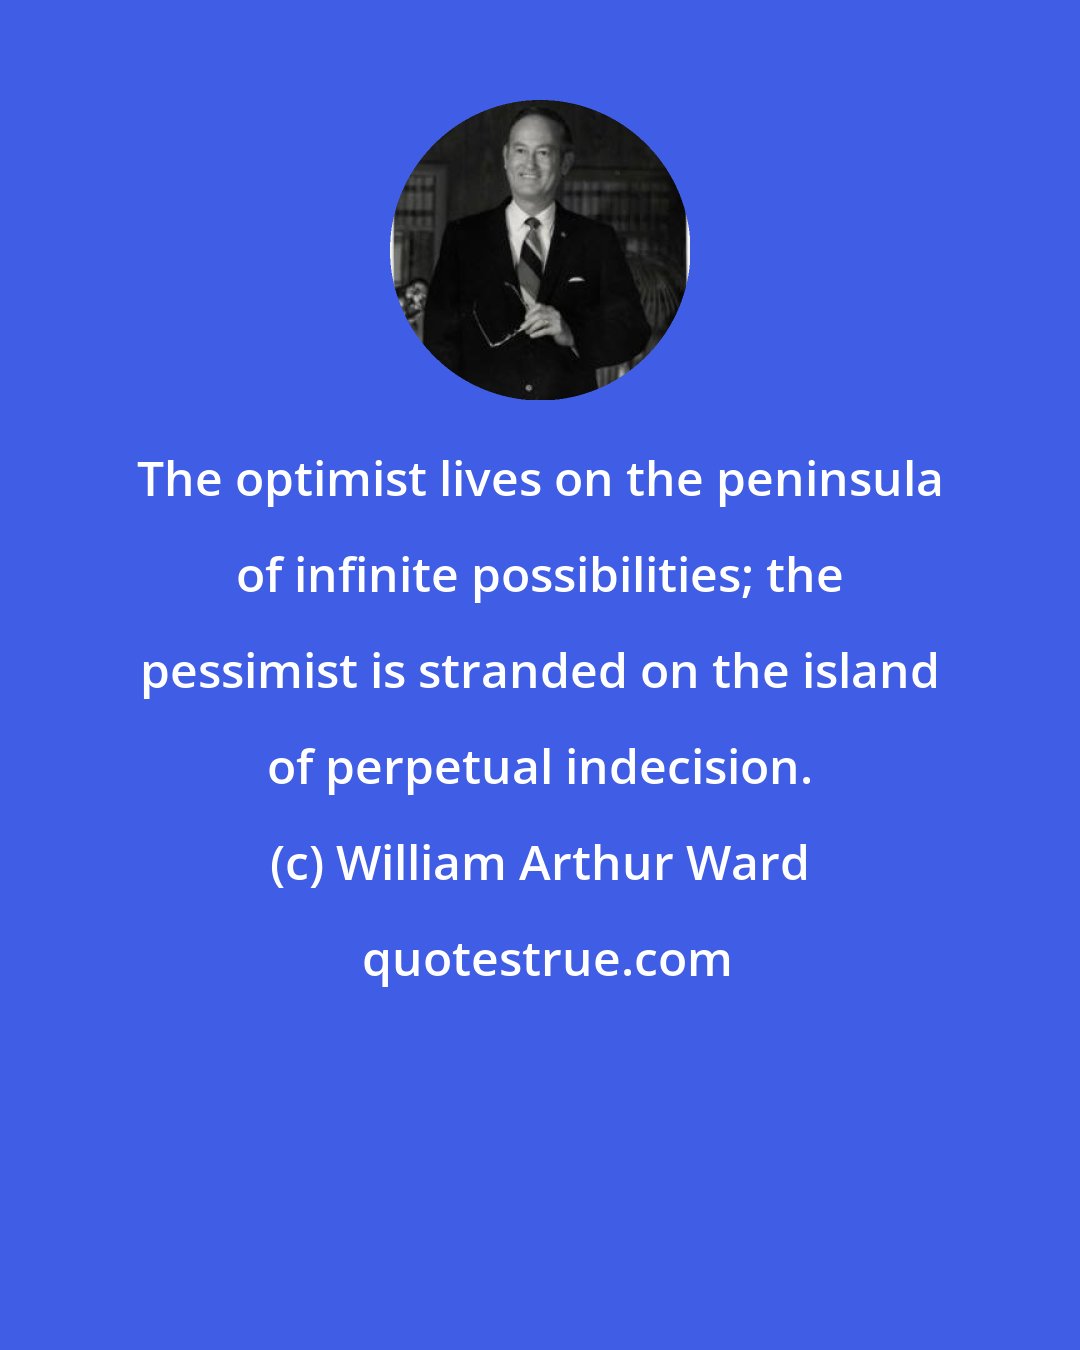 William Arthur Ward: The optimist lives on the peninsula of infinite possibilities; the pessimist is stranded on the island of perpetual indecision.